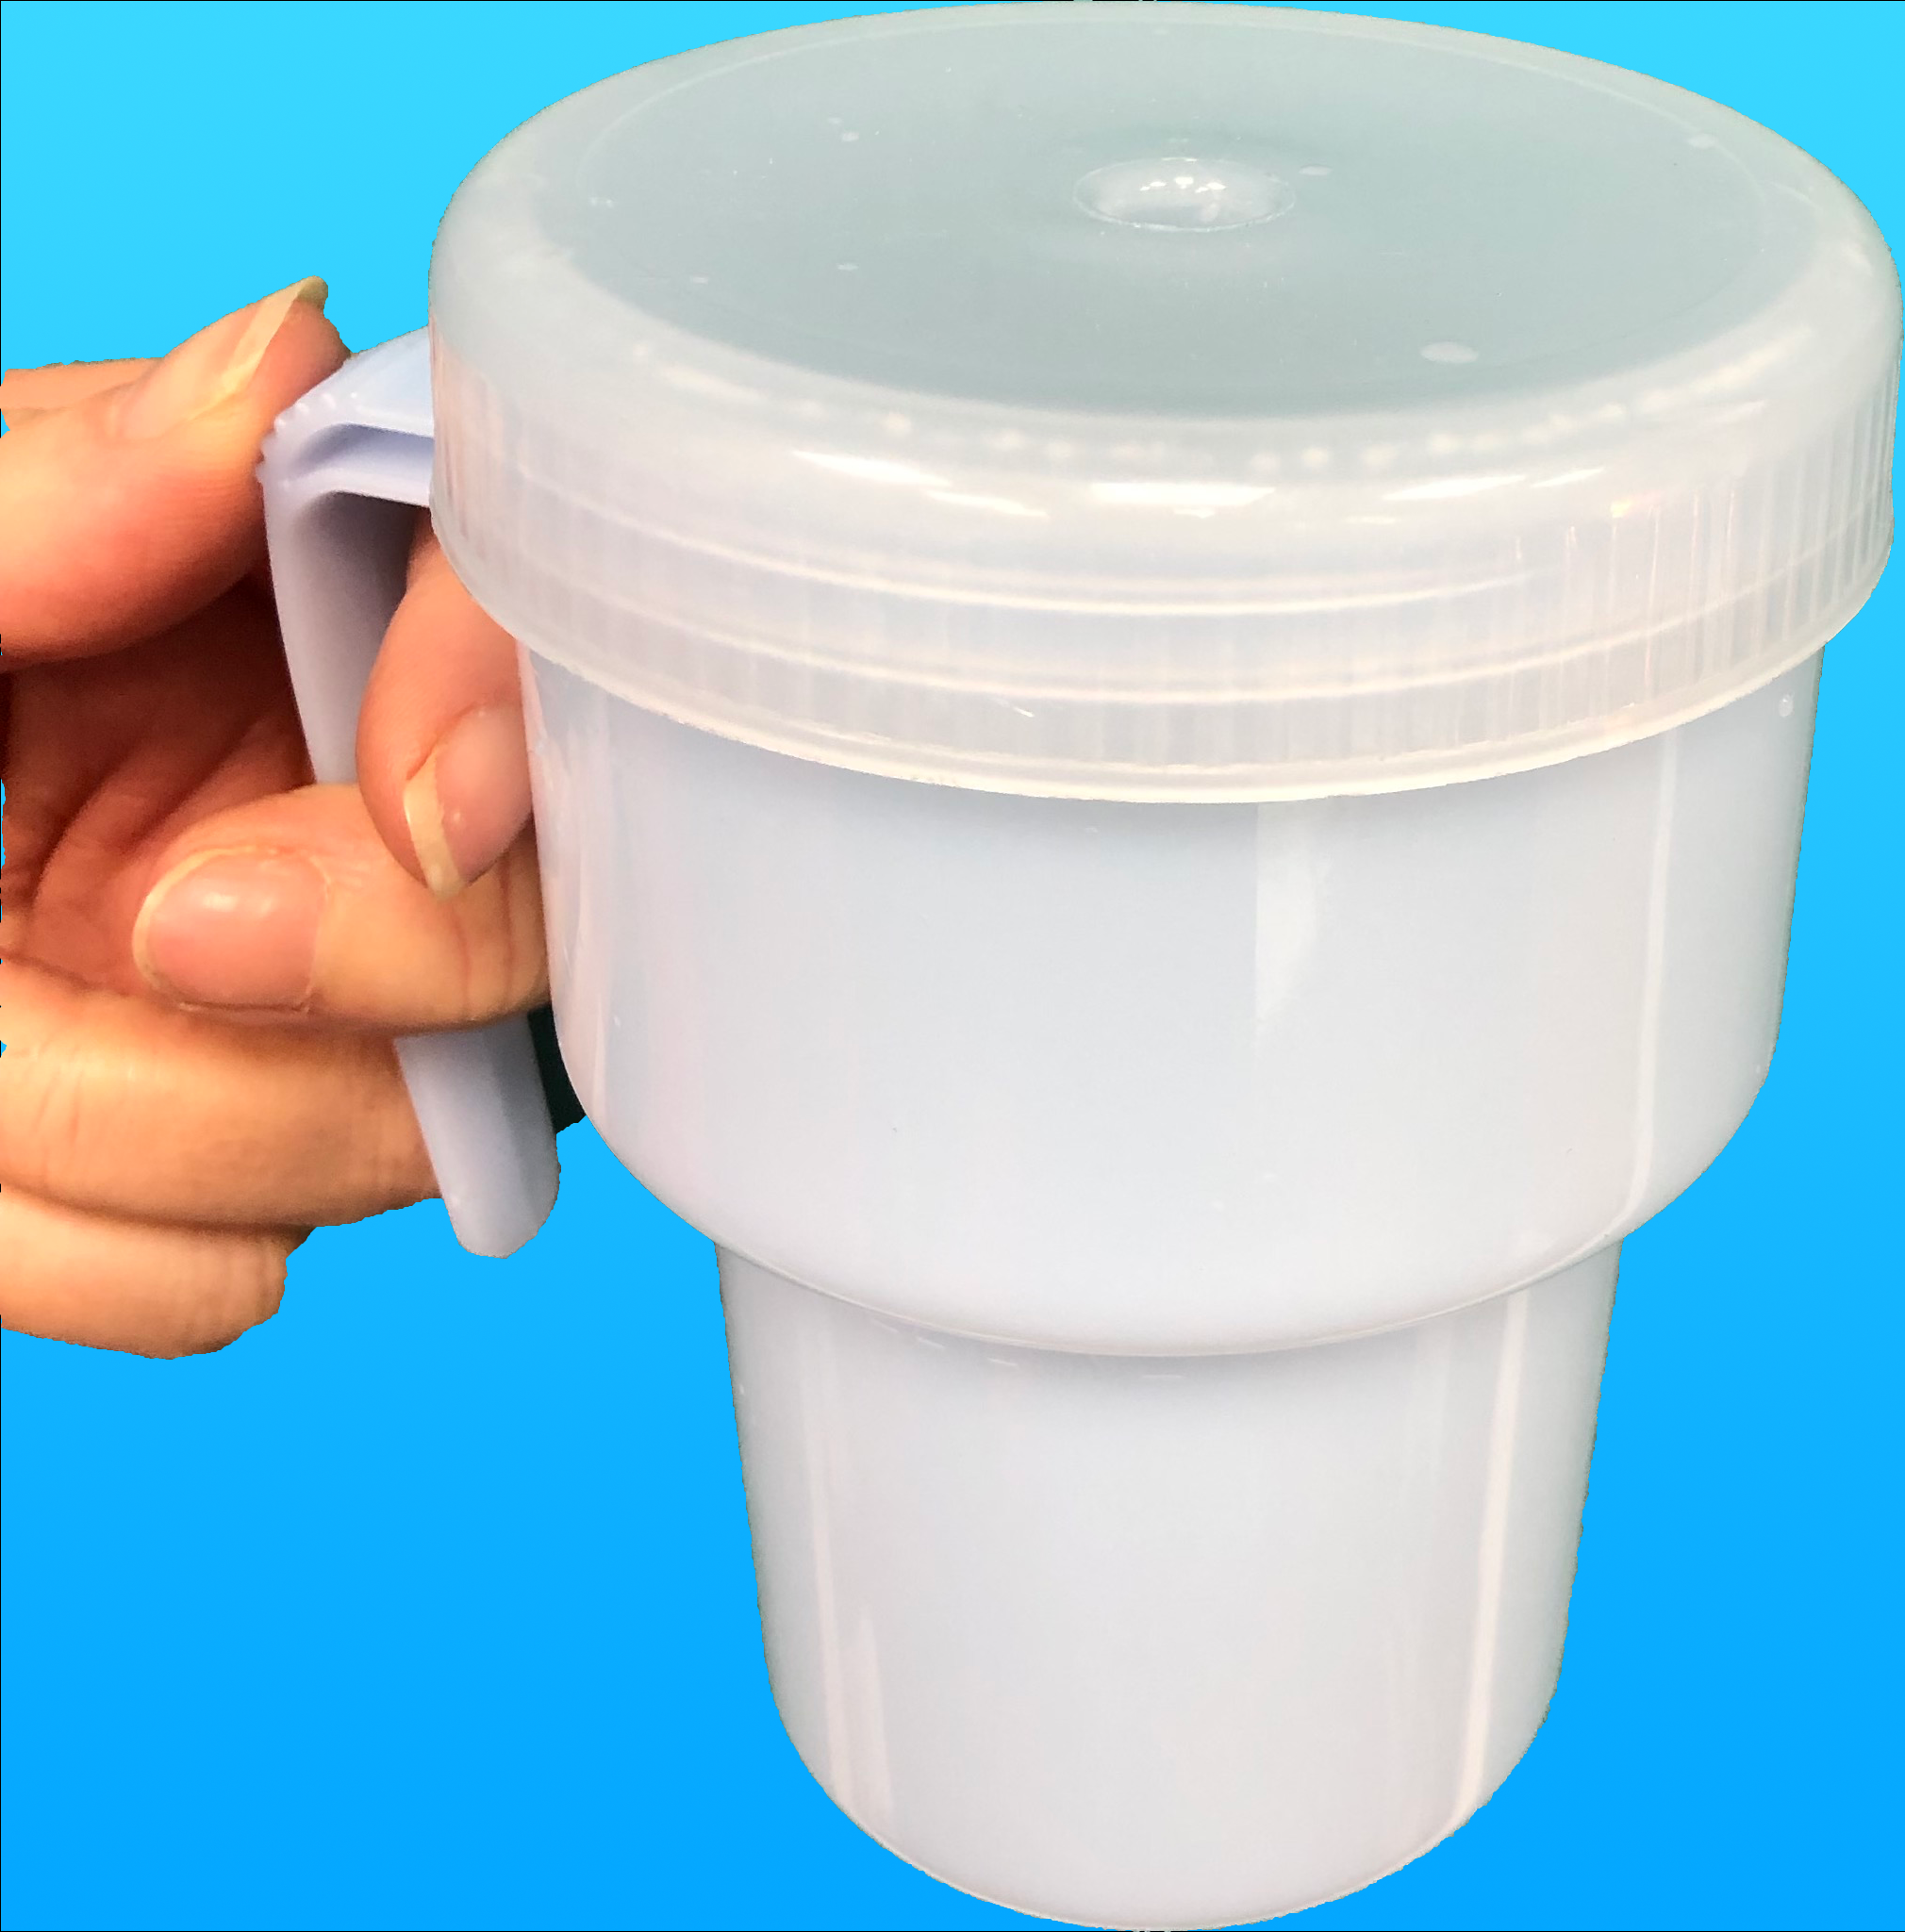 https://cdn.ecommercedns.uk/files/9/215059/0/5280270/spill-proof-cup.png